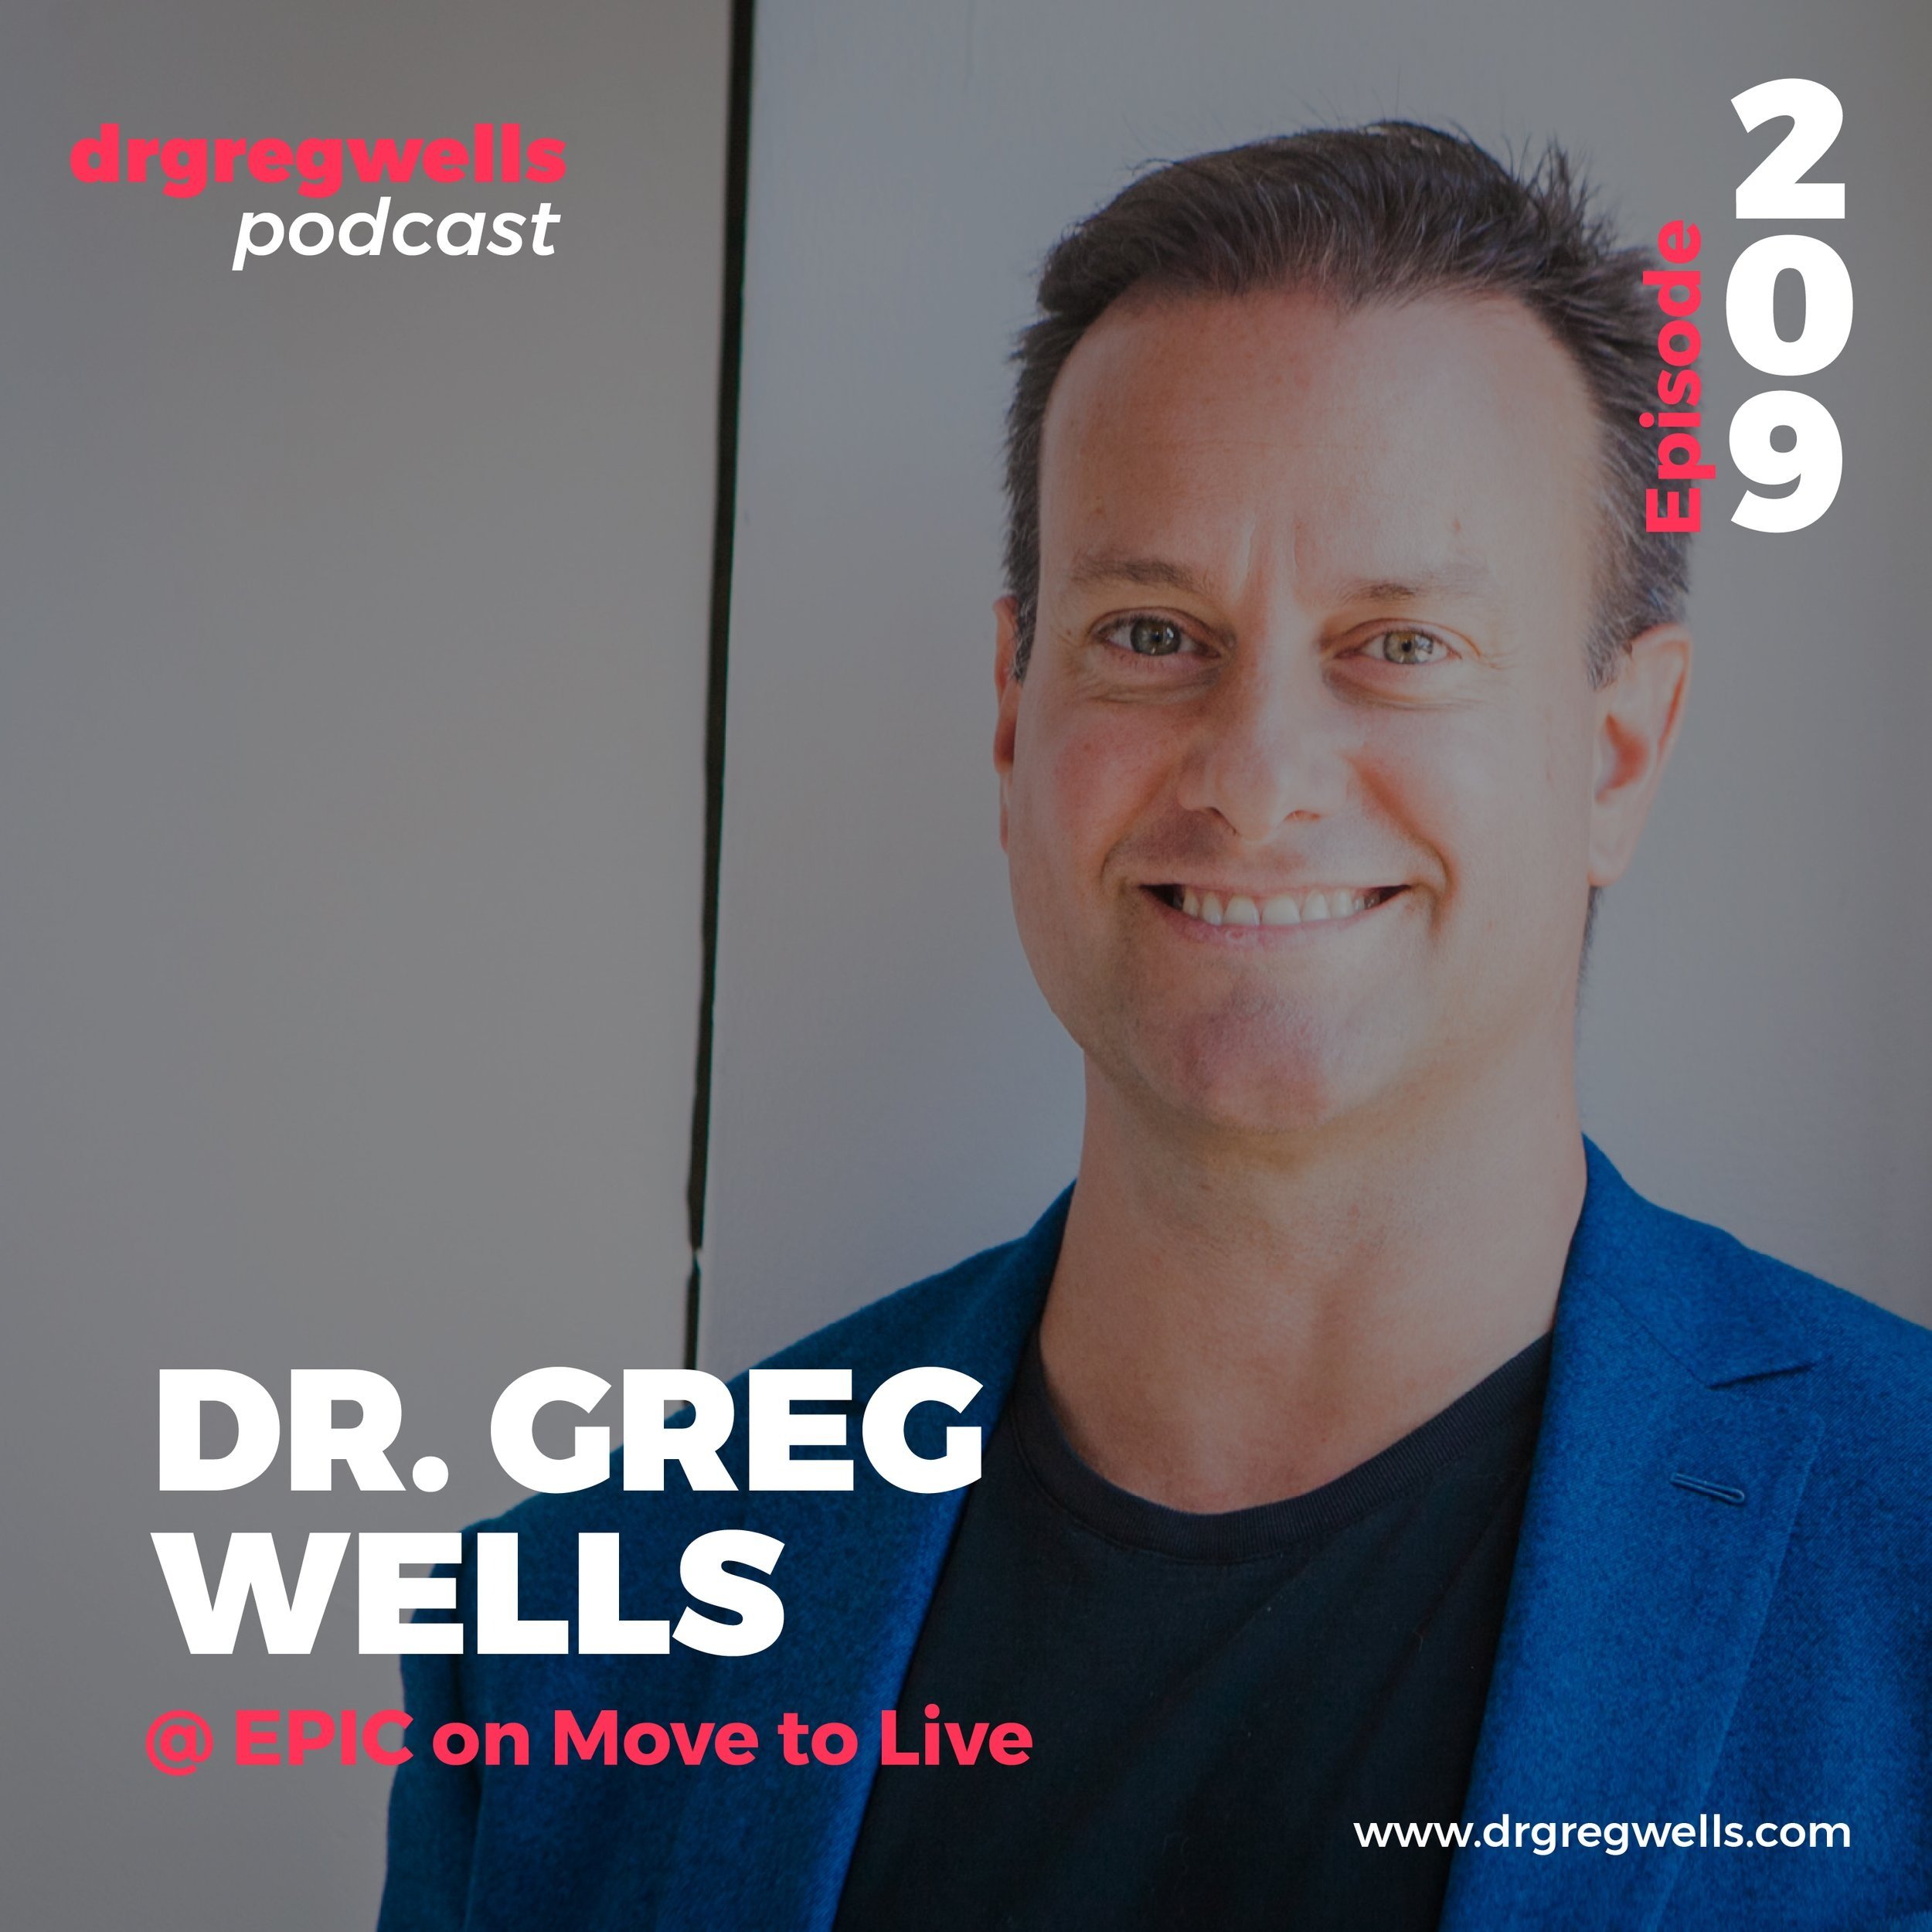 Dr+Greg+Wells+Podcast+MAY-209.jpg